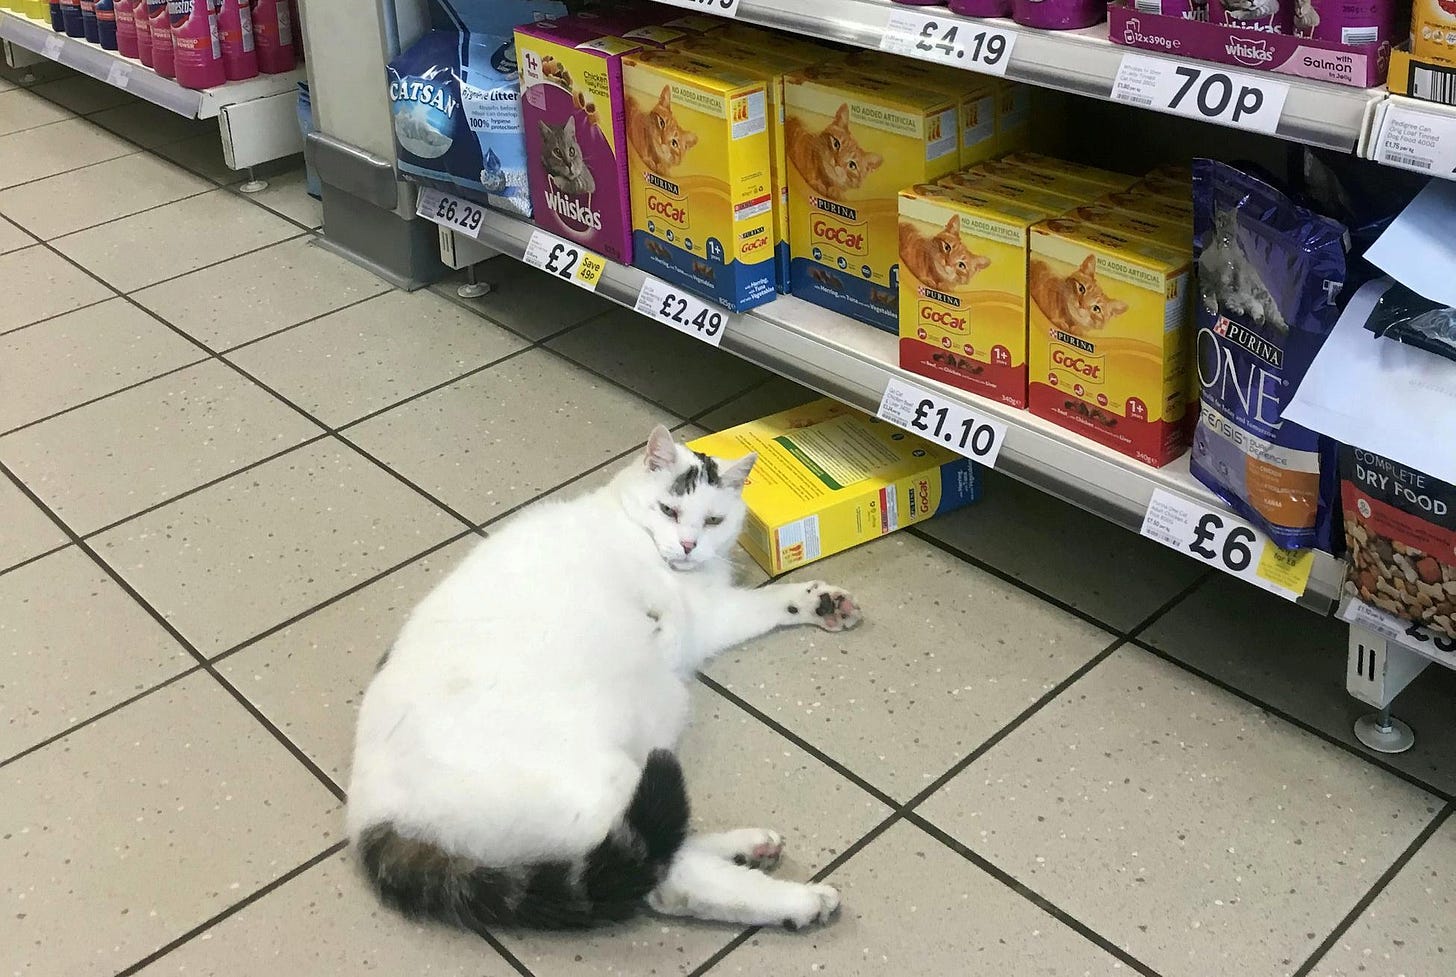  The cheeky cat knocked over a box of treats in Tesco